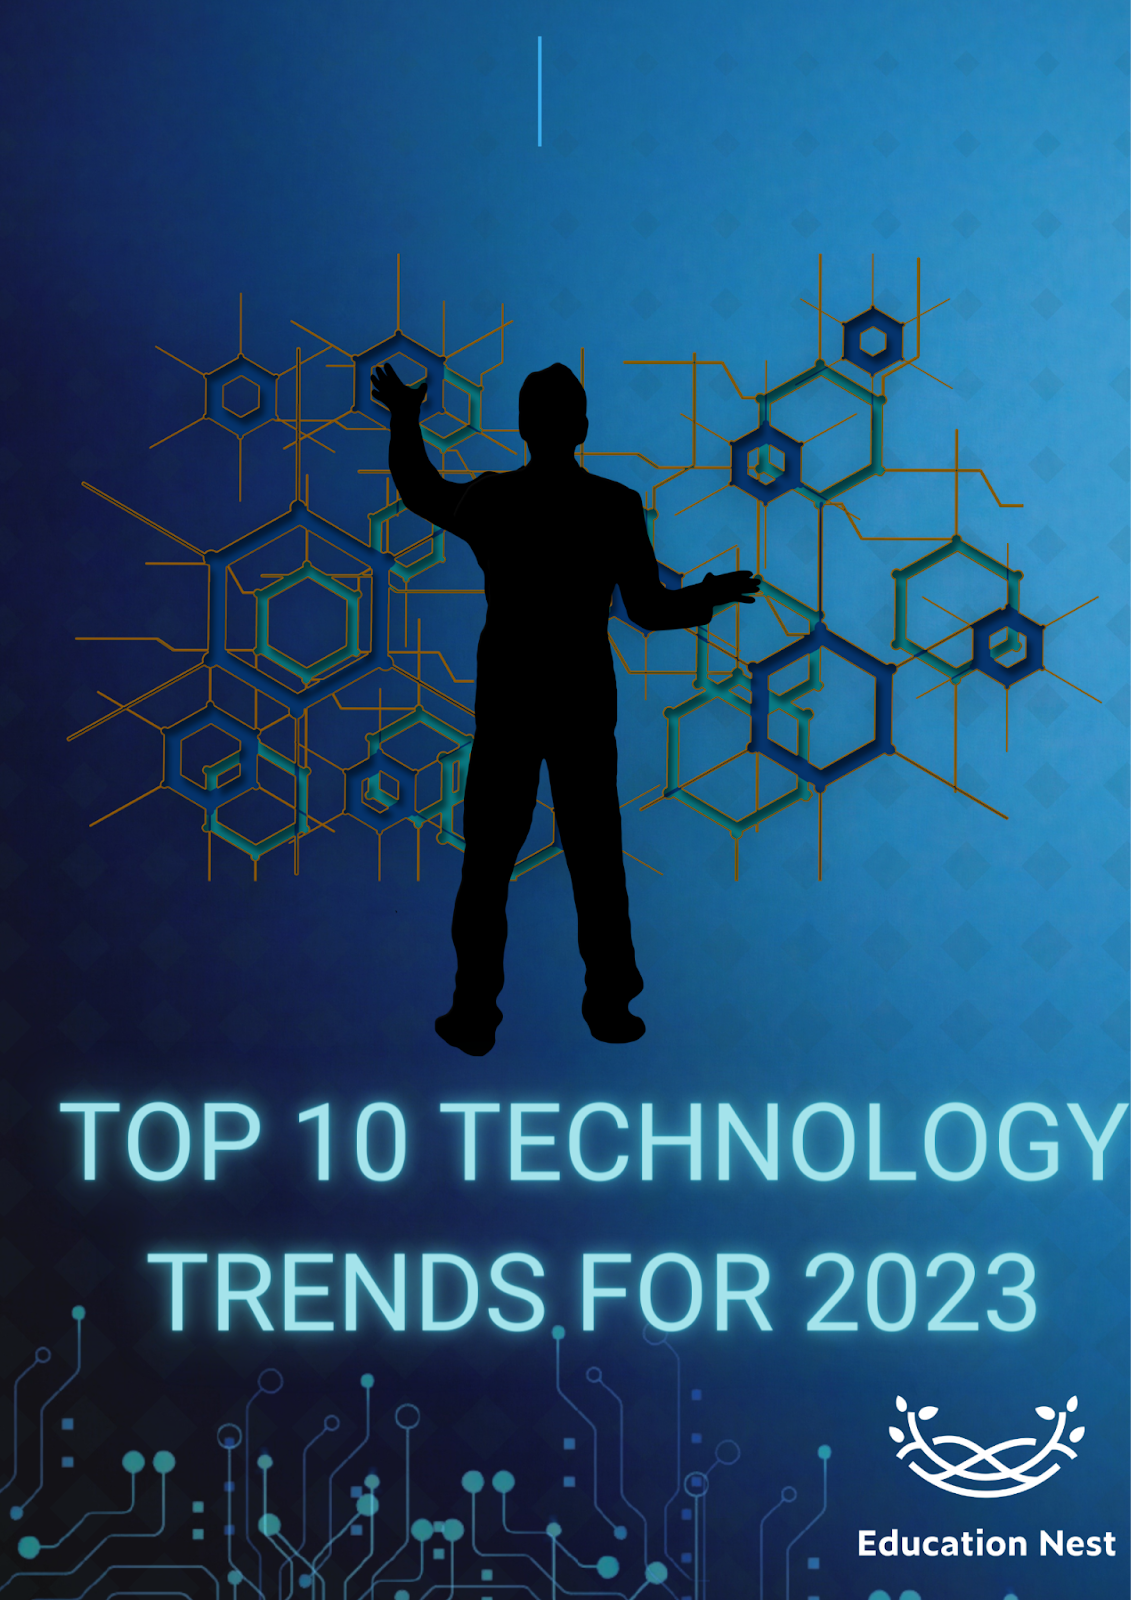 Top 10 Technology Trends for 2023